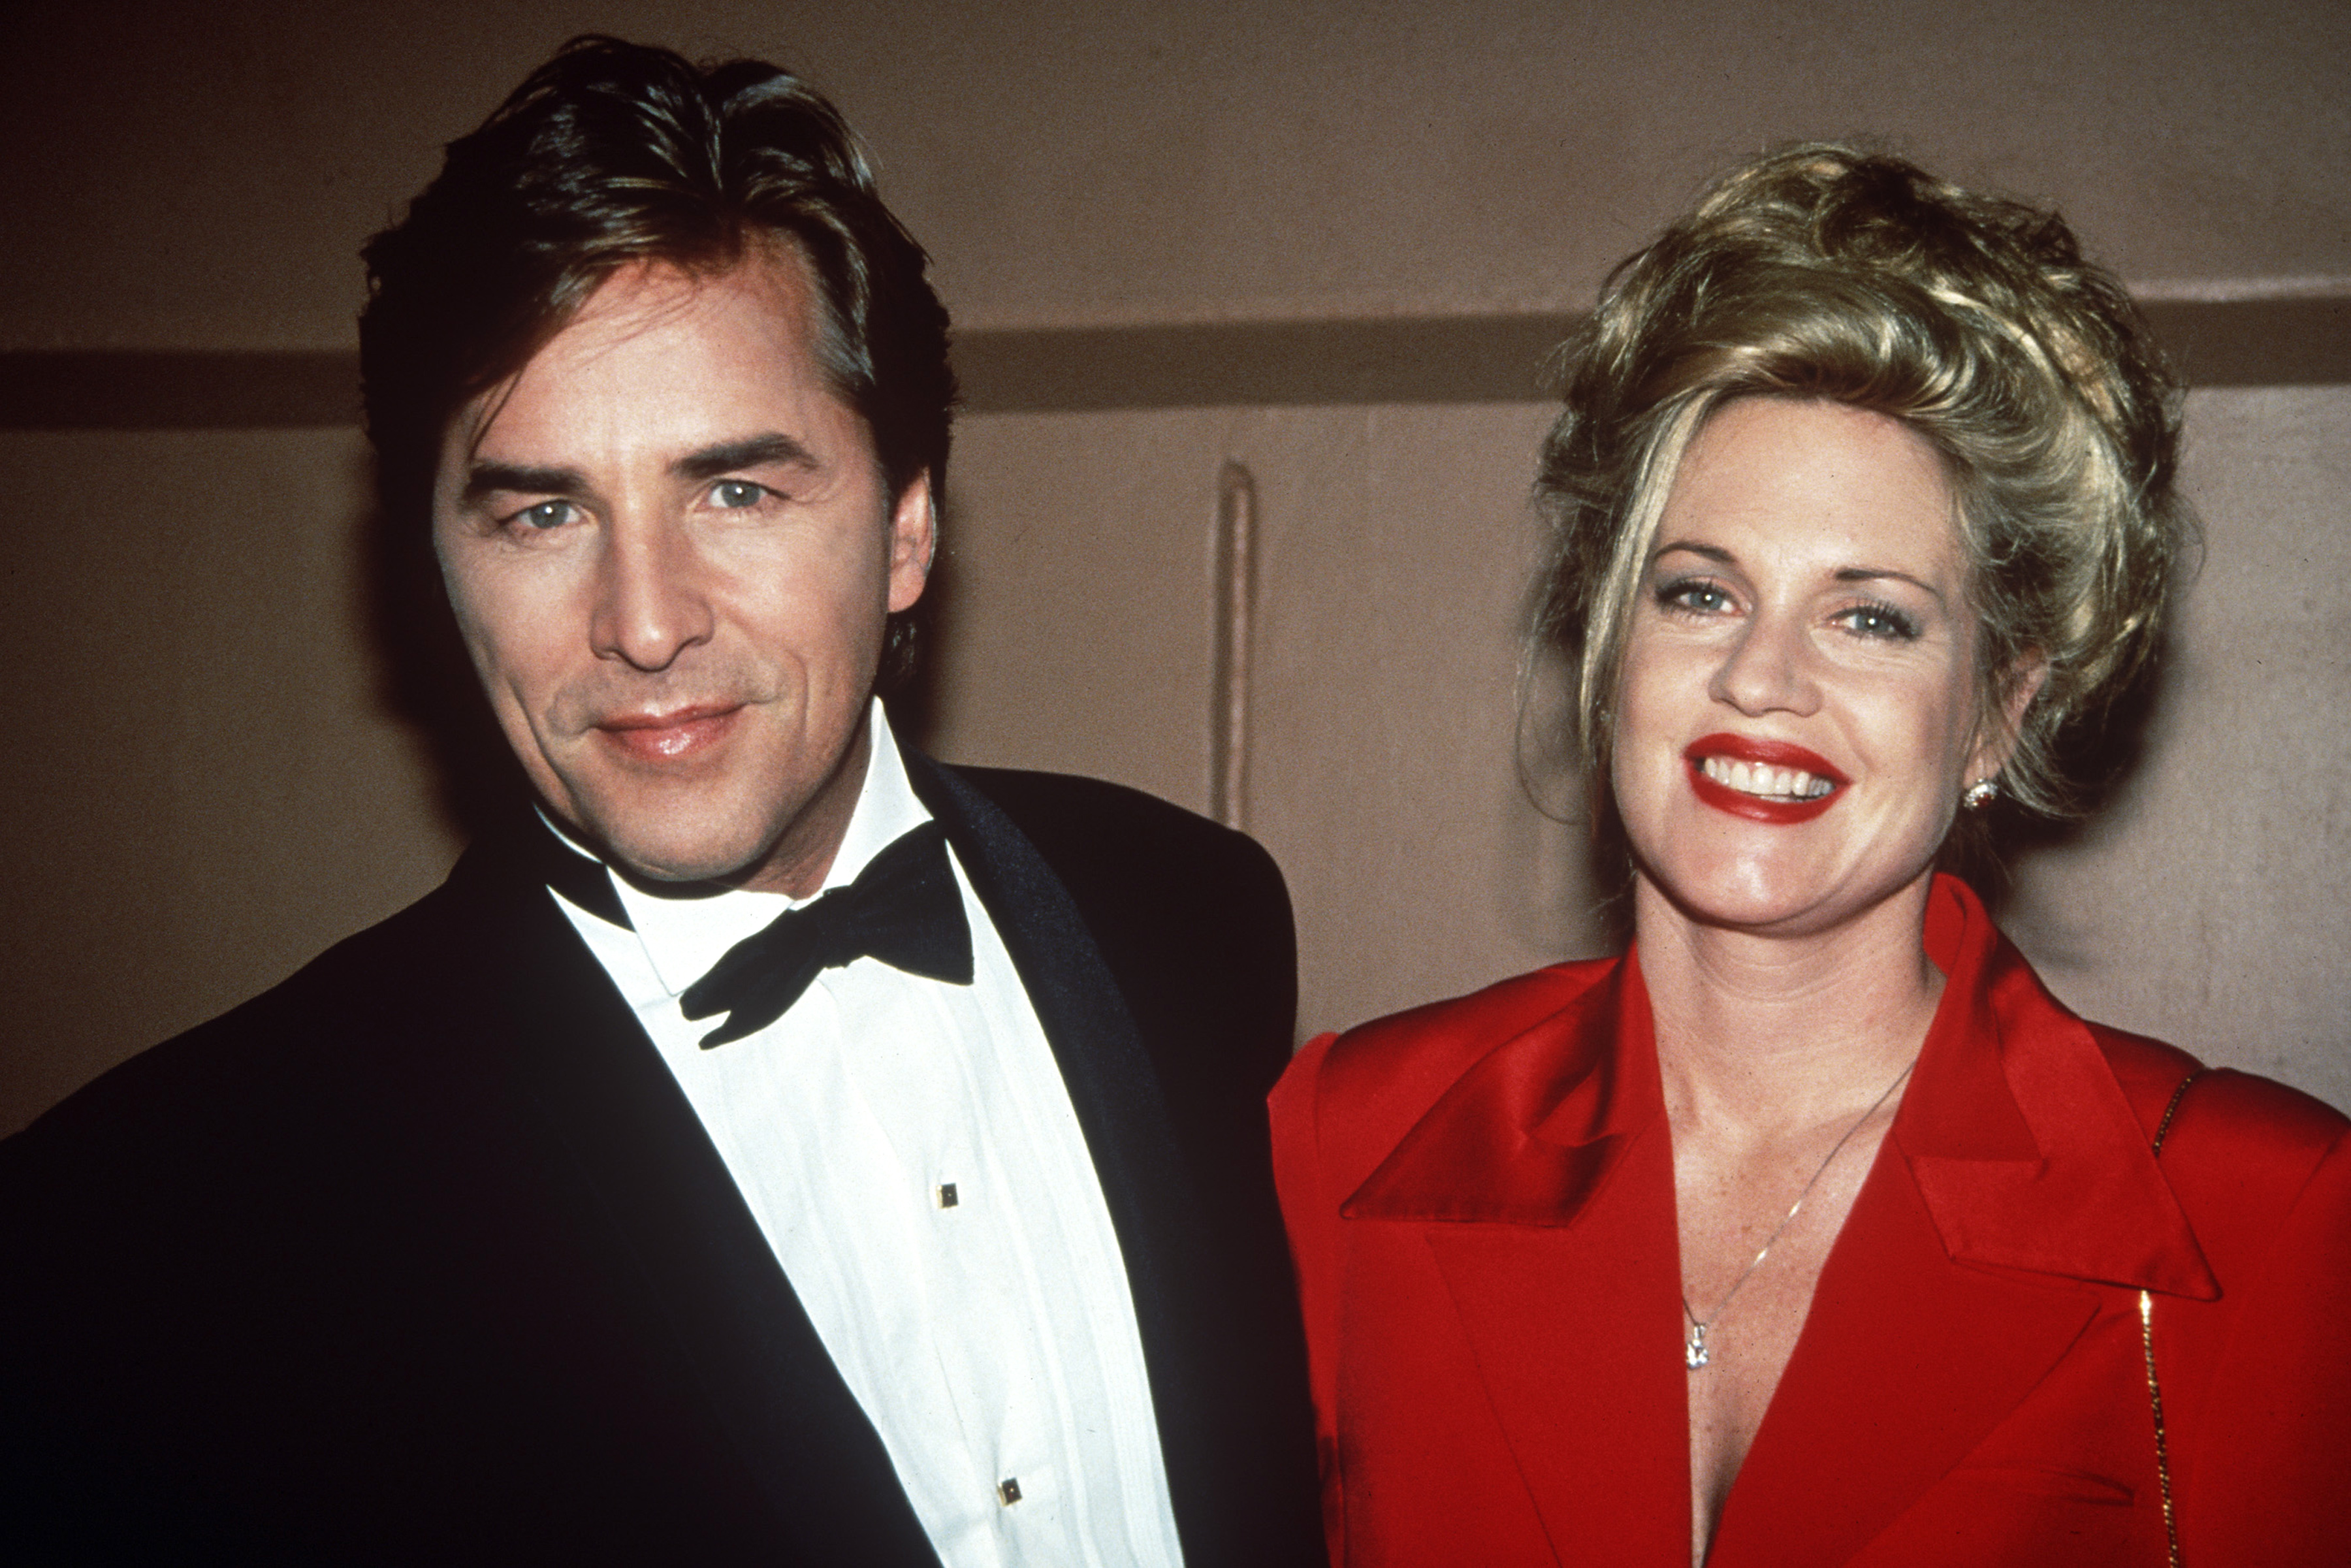 Don Johnson and Melanie Griffith at the American Teacher Awards in Disney World, Florida on November 19, 1993 | Source: Getty Images